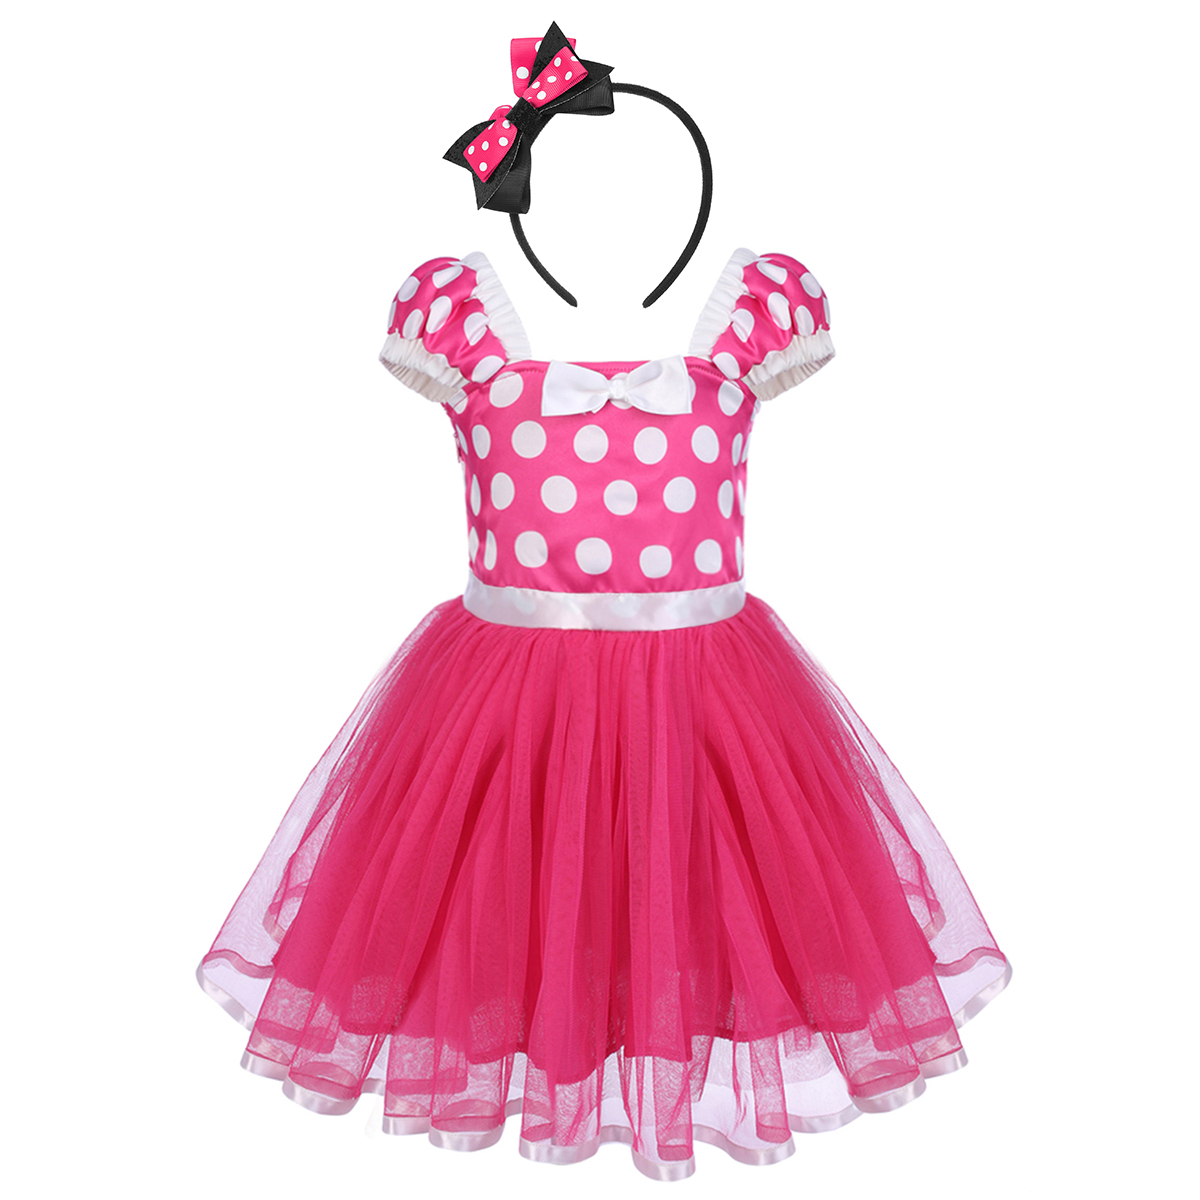 IBTOM CASTLE Toddler Girls Polka Dots Princess Party Cosplay Pageant Fancy Dress up Birthday Tutu Dress + Ears Headband Outfit Set 3-4 Years Hot Pink - image 1 of 8